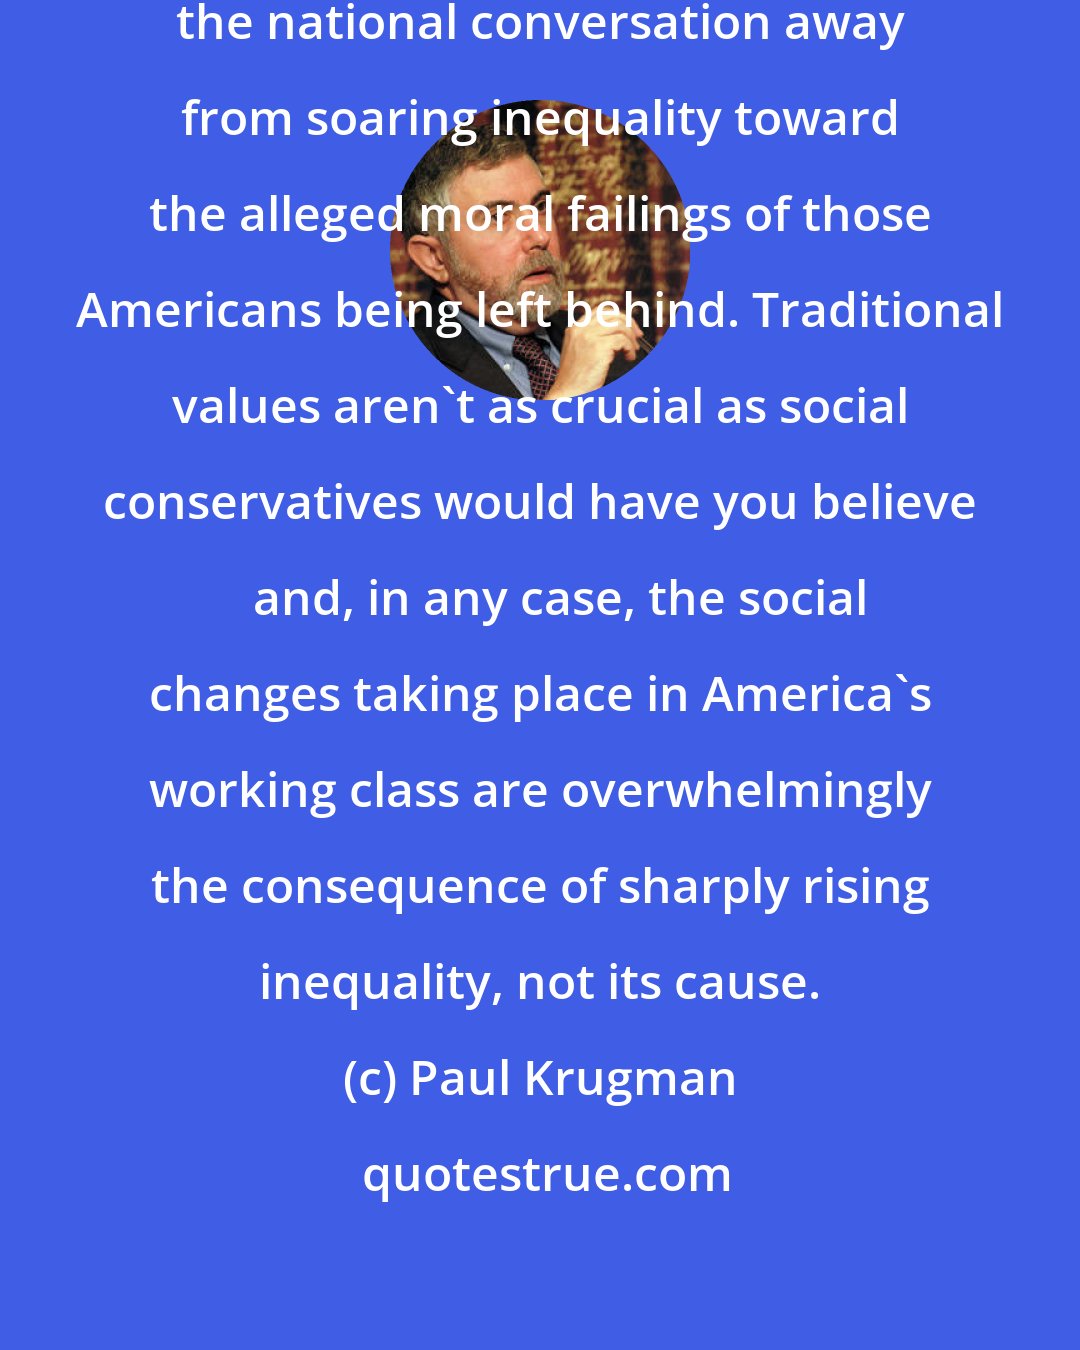 Paul Krugman: we should reject the attempt to divert the national conversation away from soaring inequality toward the alleged moral failings of those Americans being left behind. Traditional values aren't as crucial as social conservatives would have you believe  and, in any case, the social changes taking place in America's working class are overwhelmingly the consequence of sharply rising inequality, not its cause.